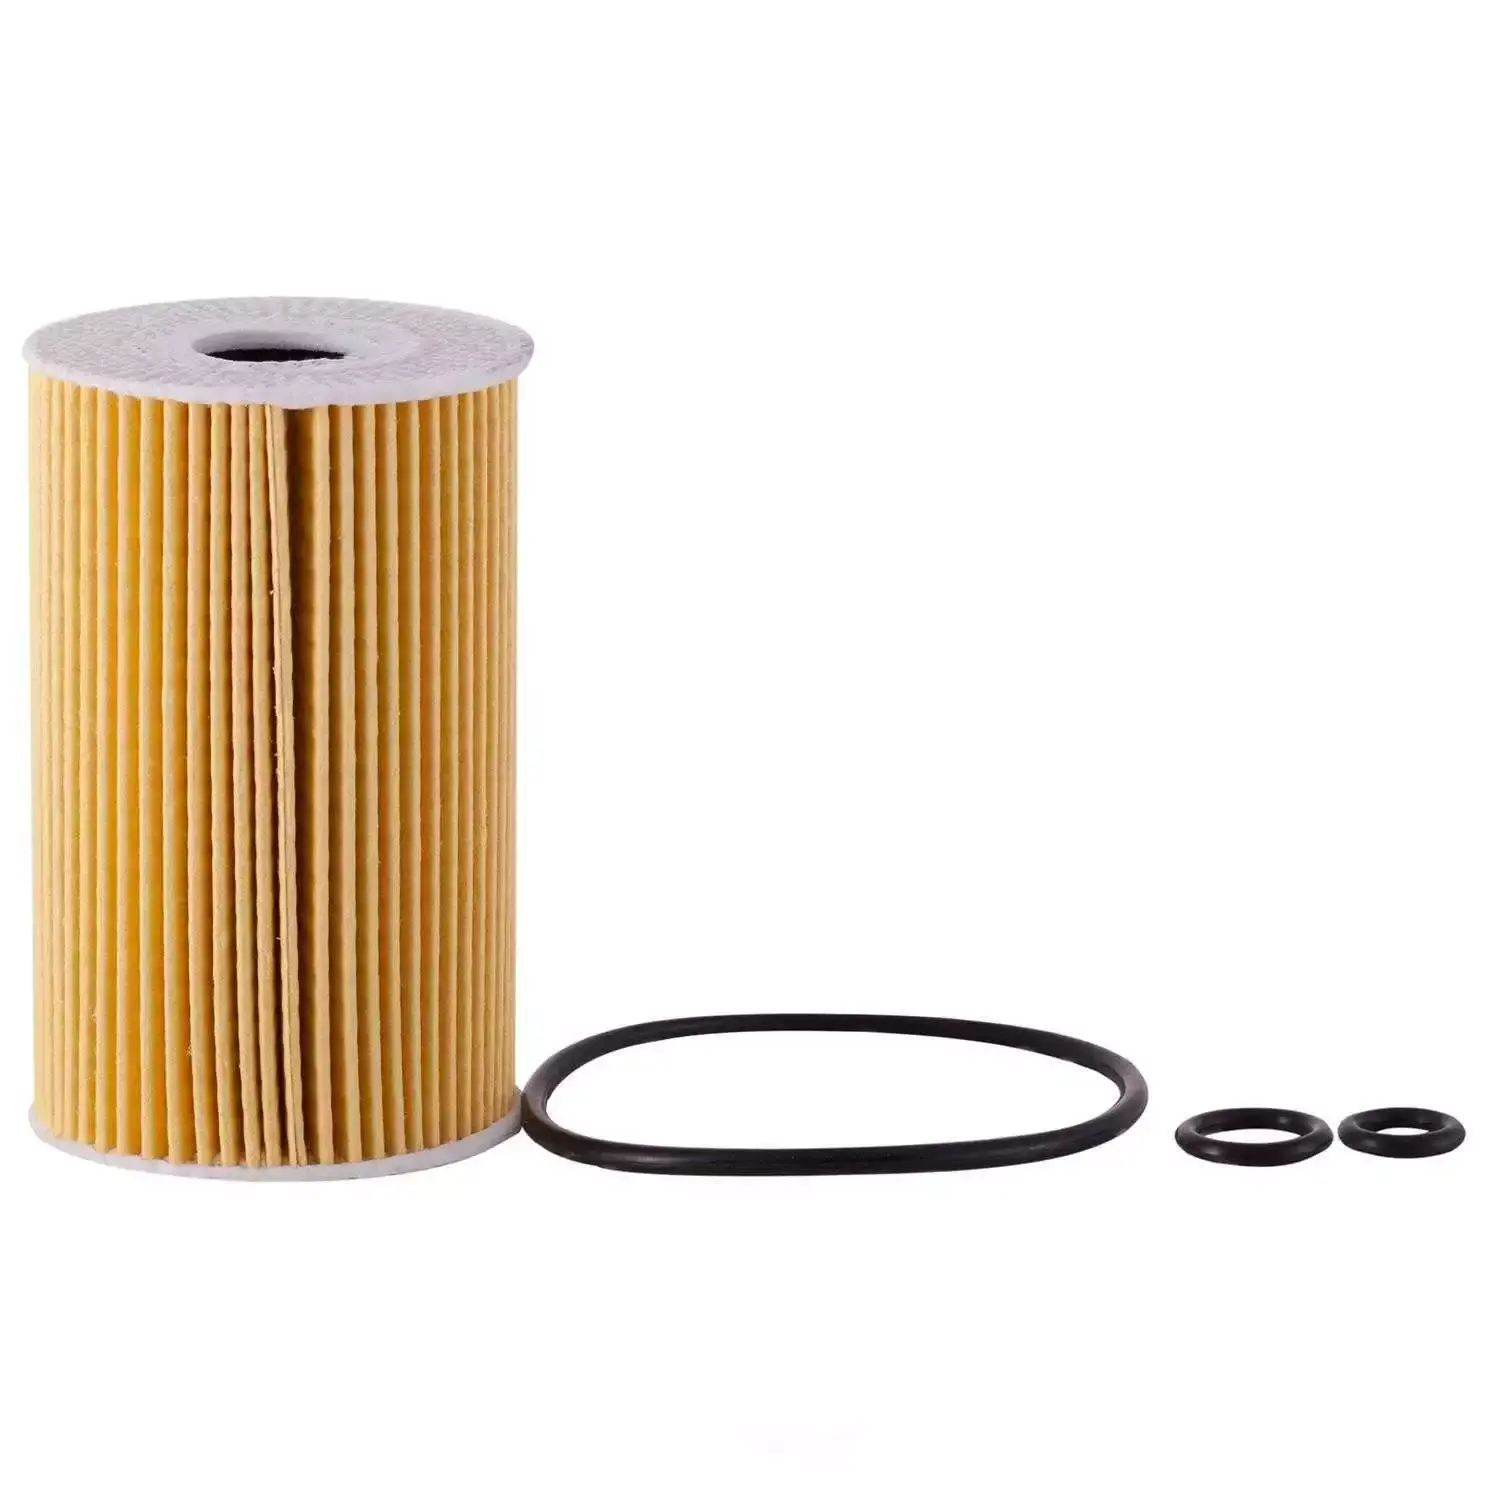 03l115562 Duitse Auto Motoroliefilters Machineonderdelen Voor Vw Golf Caddy Kever Audi A1 A3 A4 A5 A6 Oliefiltermachine